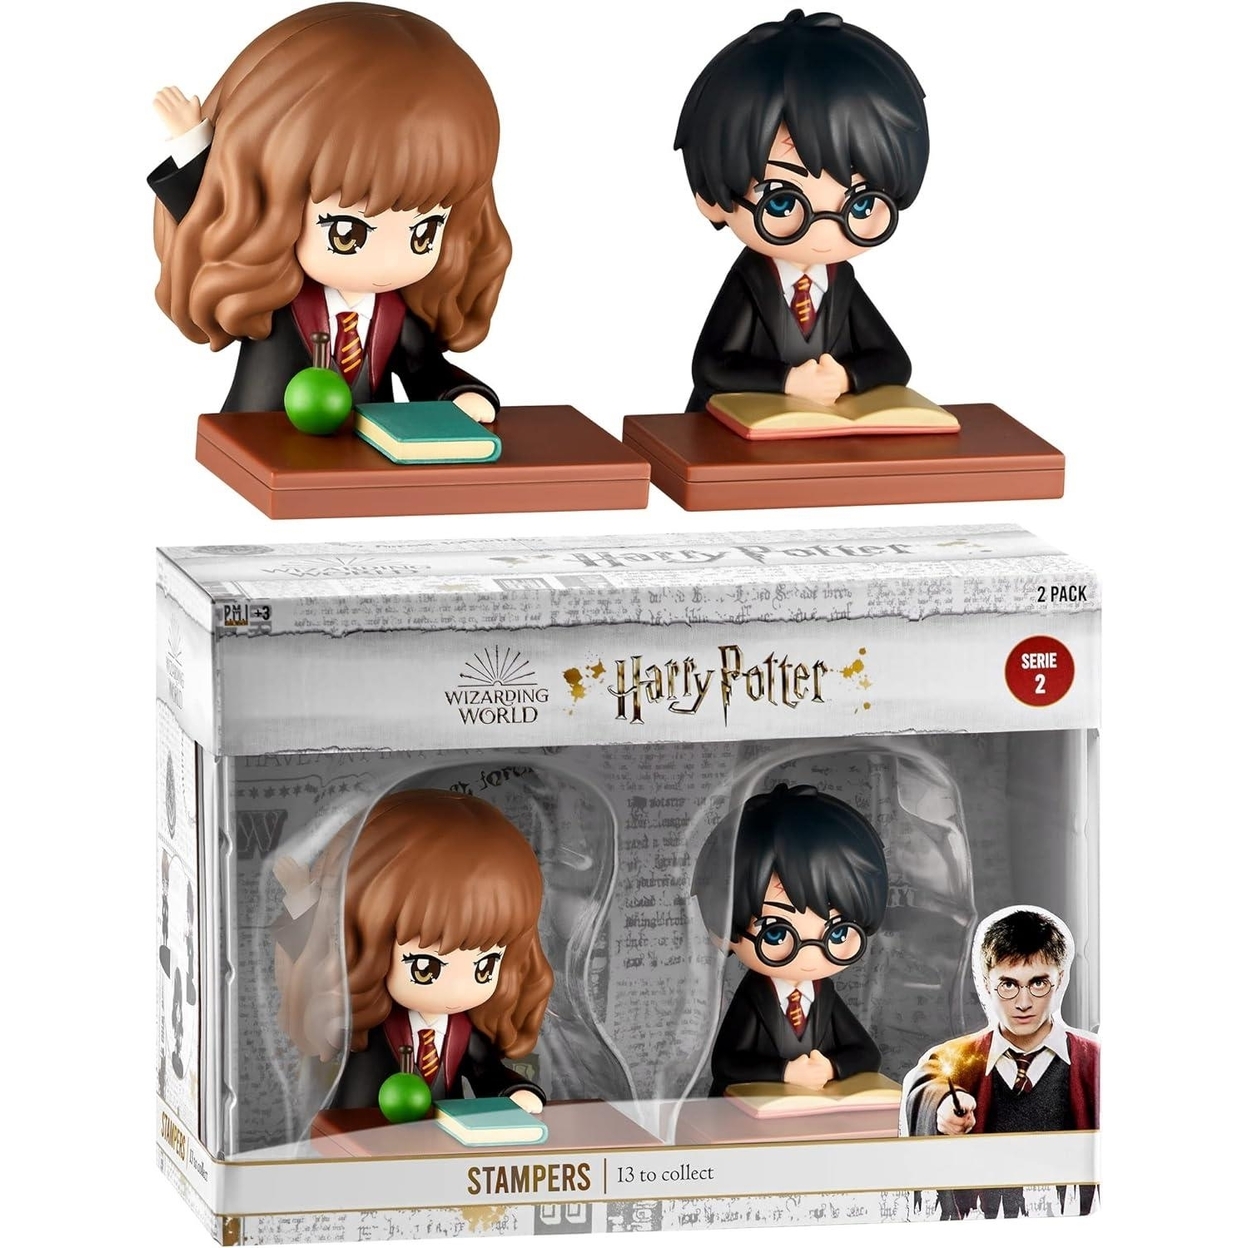 Harry Potter And Hermione Stamps Desk Party Decor Mini Figurines Toy Gifts PMI International